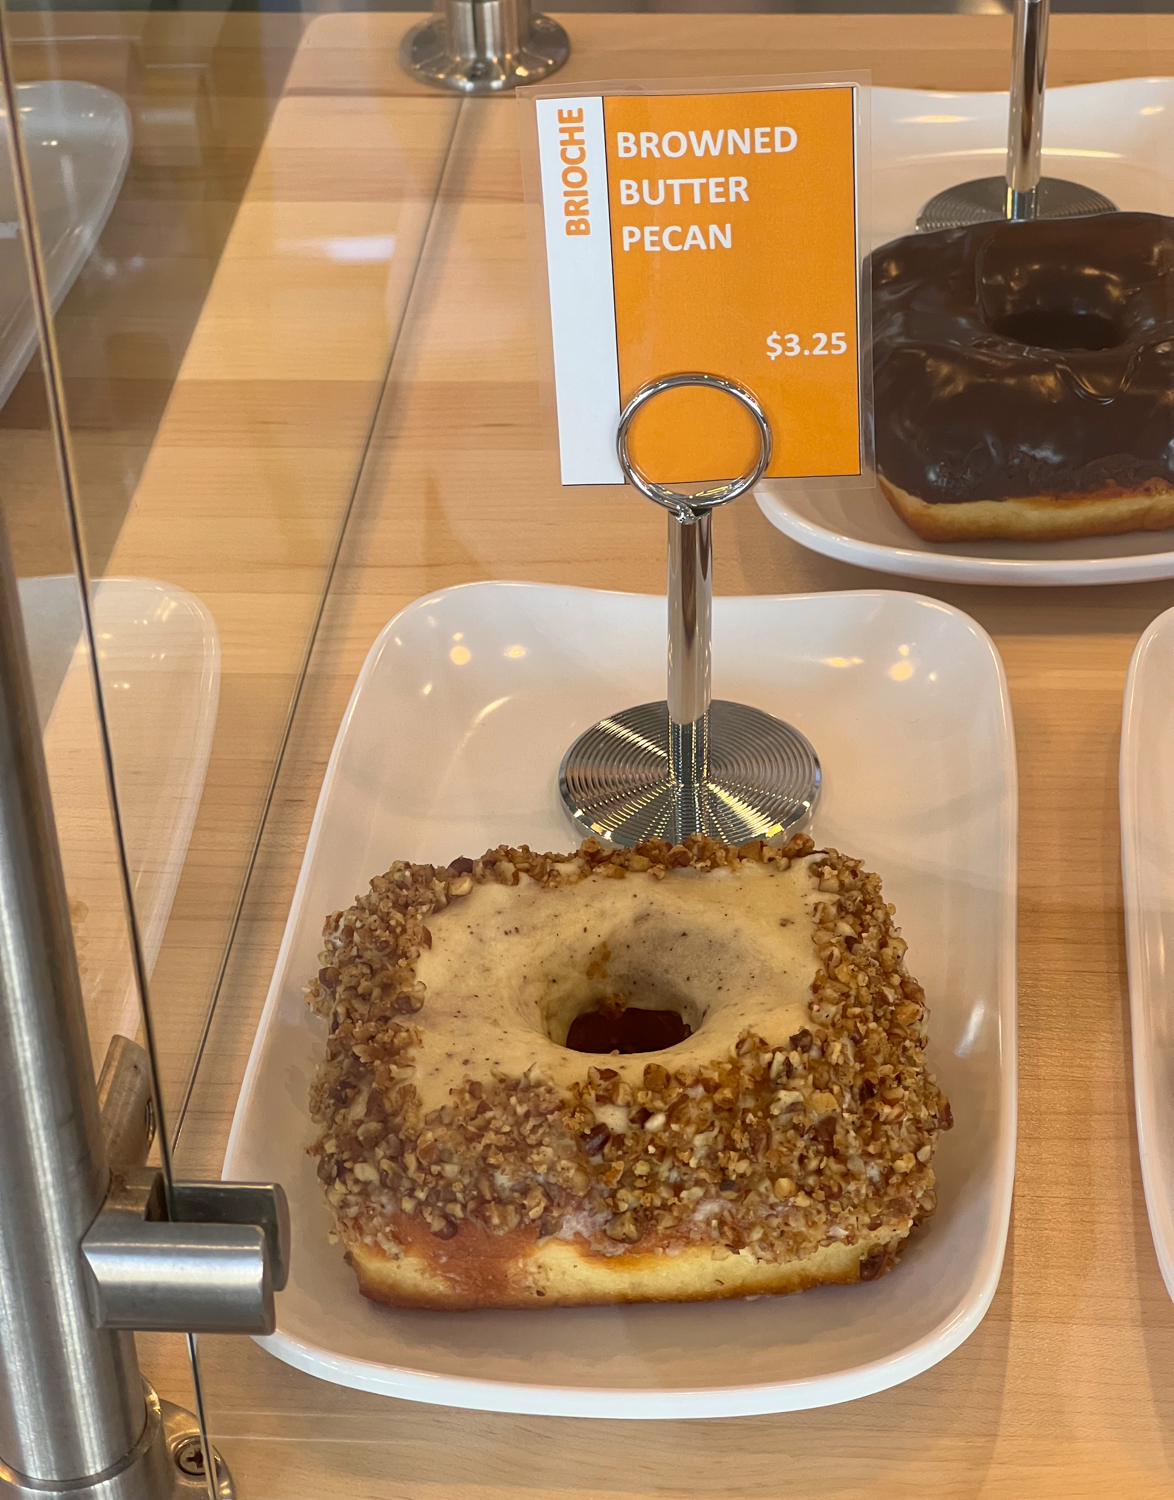 The Doughnut Decadence Expansion – NOLA Doughnuts Goes to Beaverton, Oregon For Their Third Location! This is Culinary Treasure by Steven Shomler